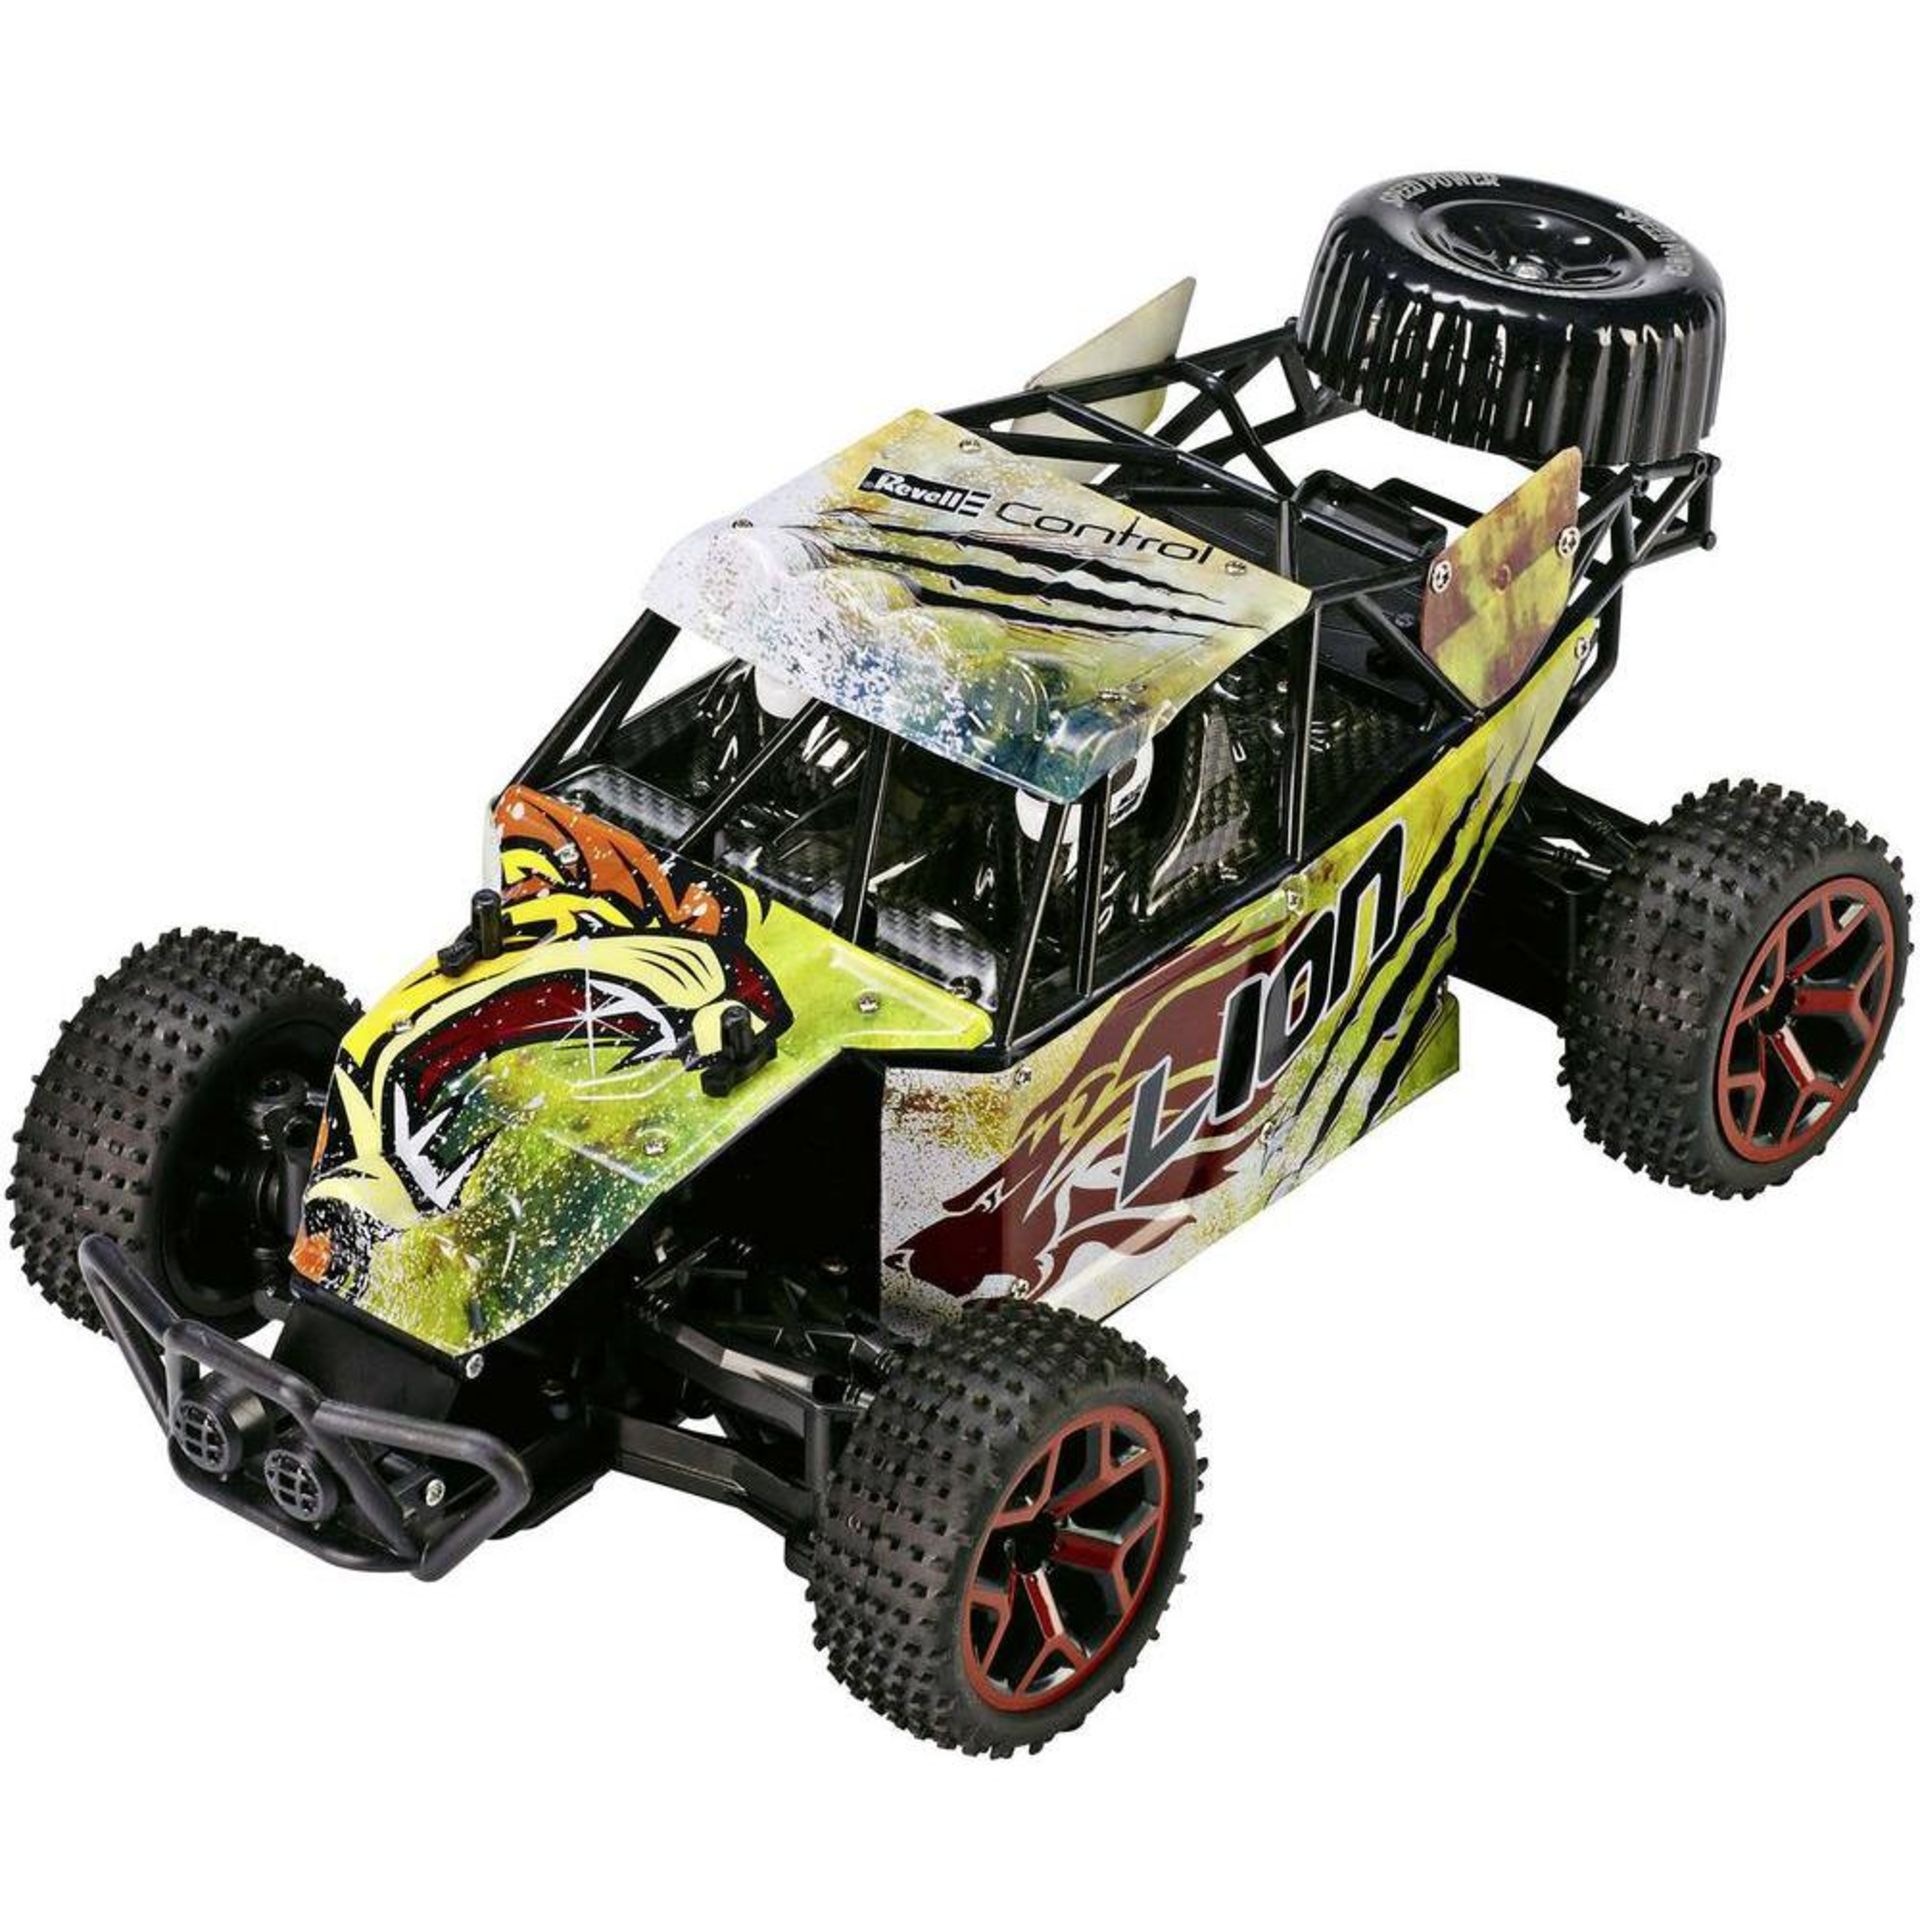 V Brand New Revell R/C 4 Wheel Drive Sand Buggu Lion Up To 15 kph 2.4GHz 2 Channel Remote Control